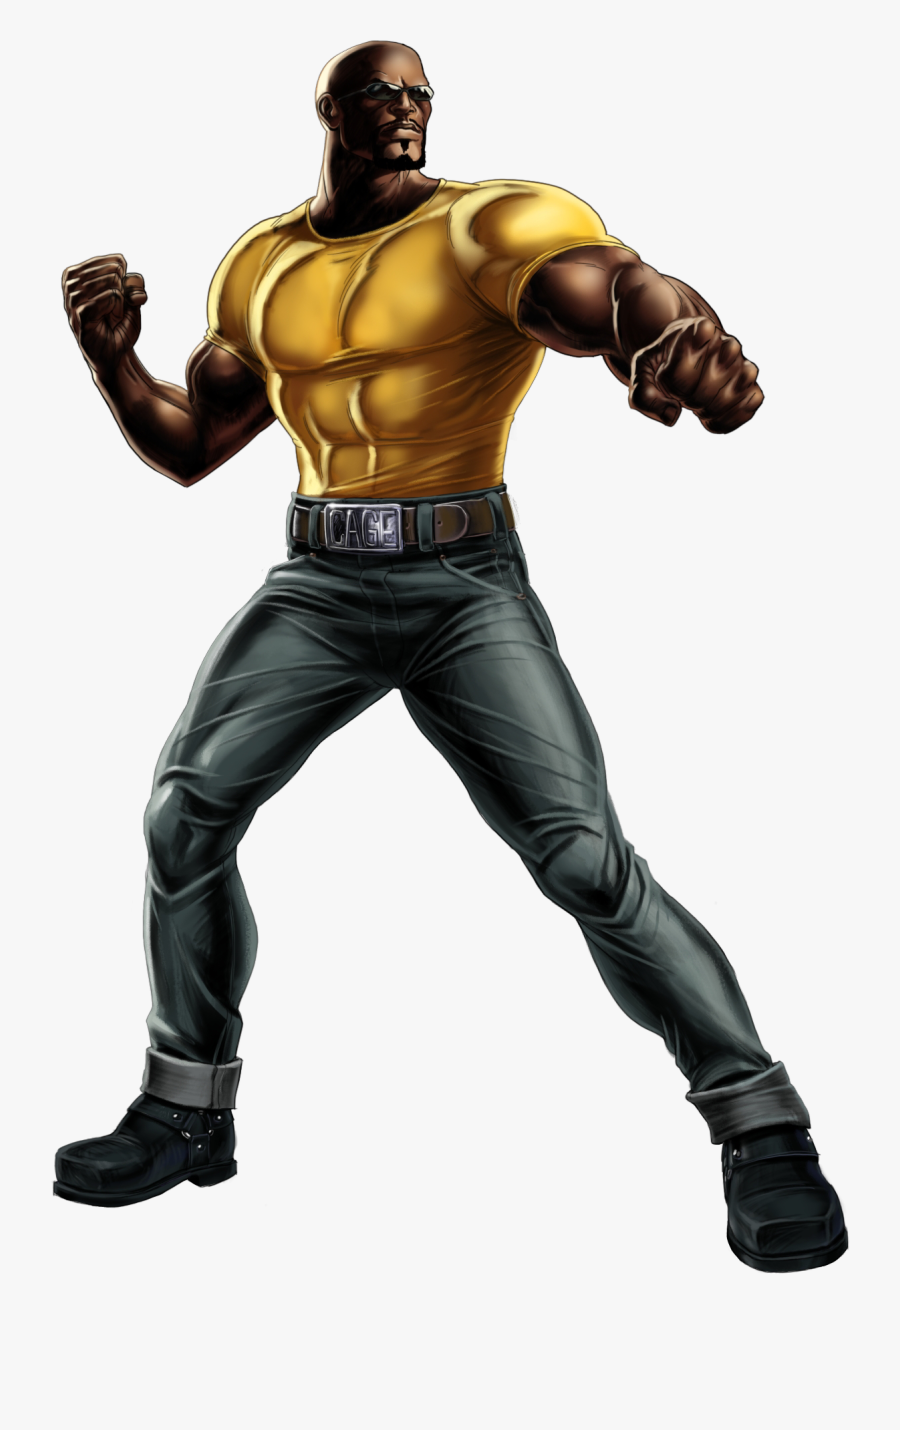 See The Source Image - Luke Cage Marvel Png, Transparent Clipart